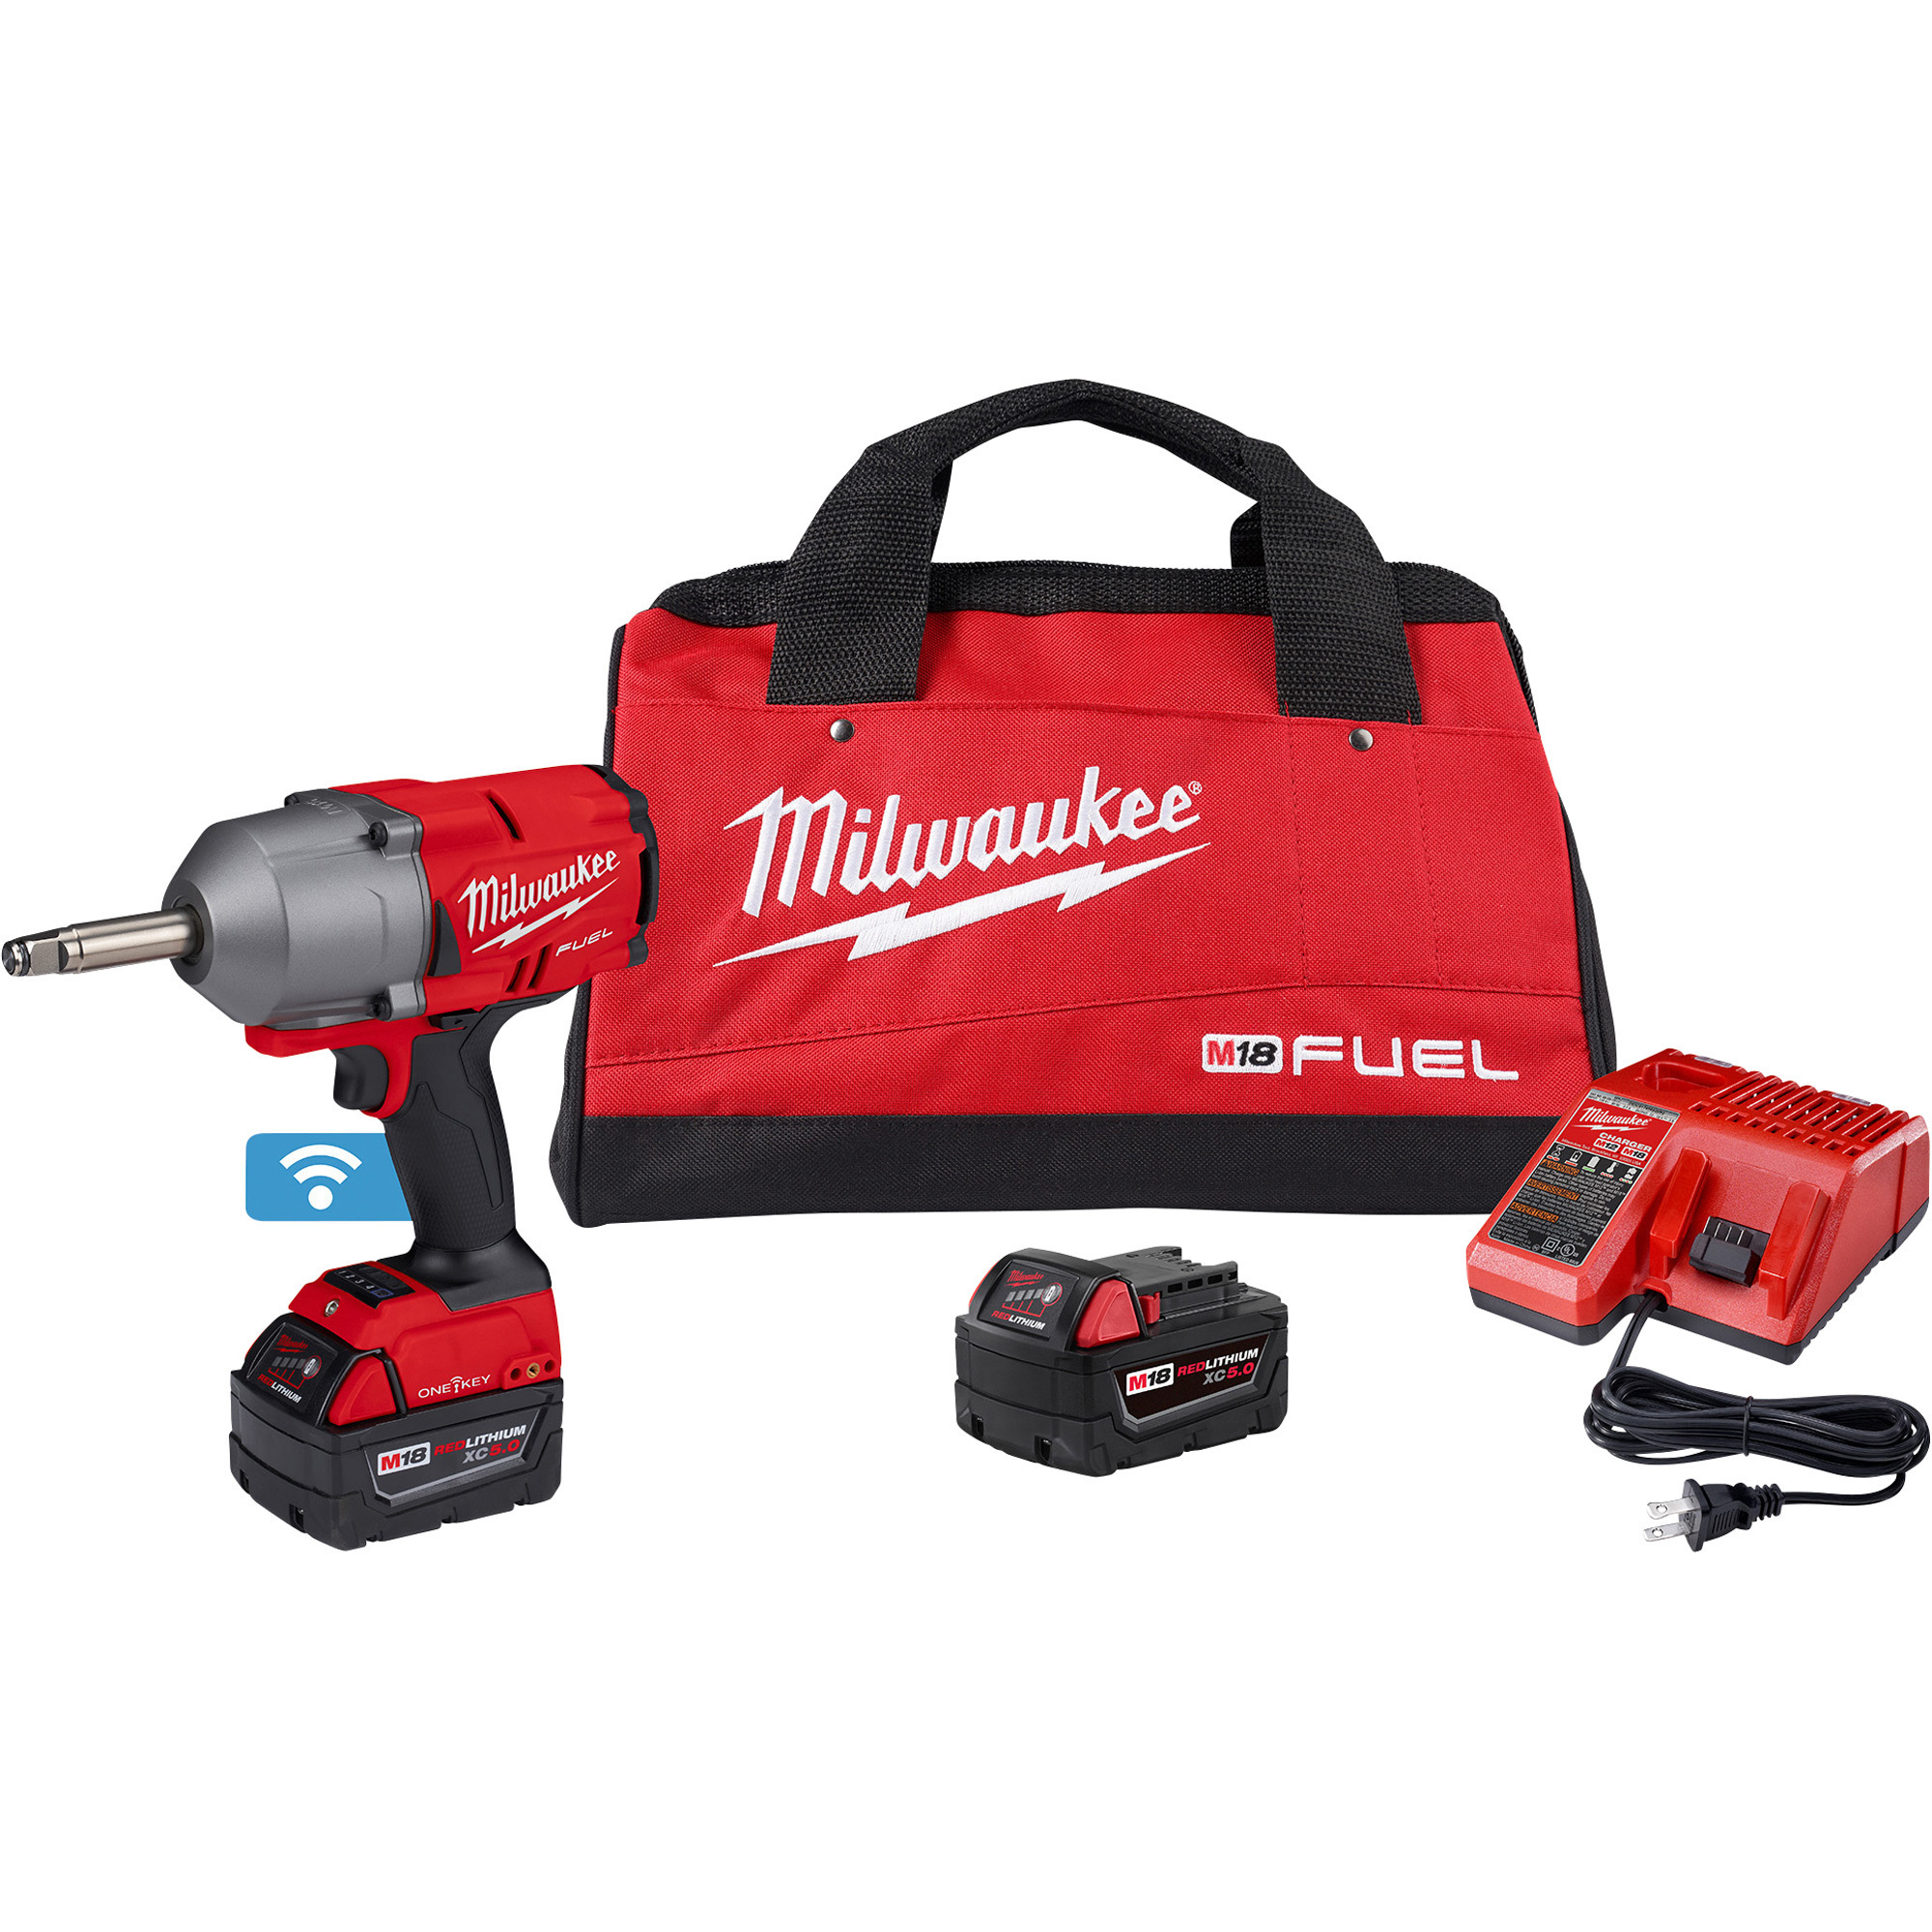 Milwaukee M18 FUEL Cordless Ext. Anvil Controlled Torque Impact Wrench Kit with ONE-KEY, 1/2Inch Drive, 1100 Ft./Lbs. Torque, 2 Batteries, Model 2769-